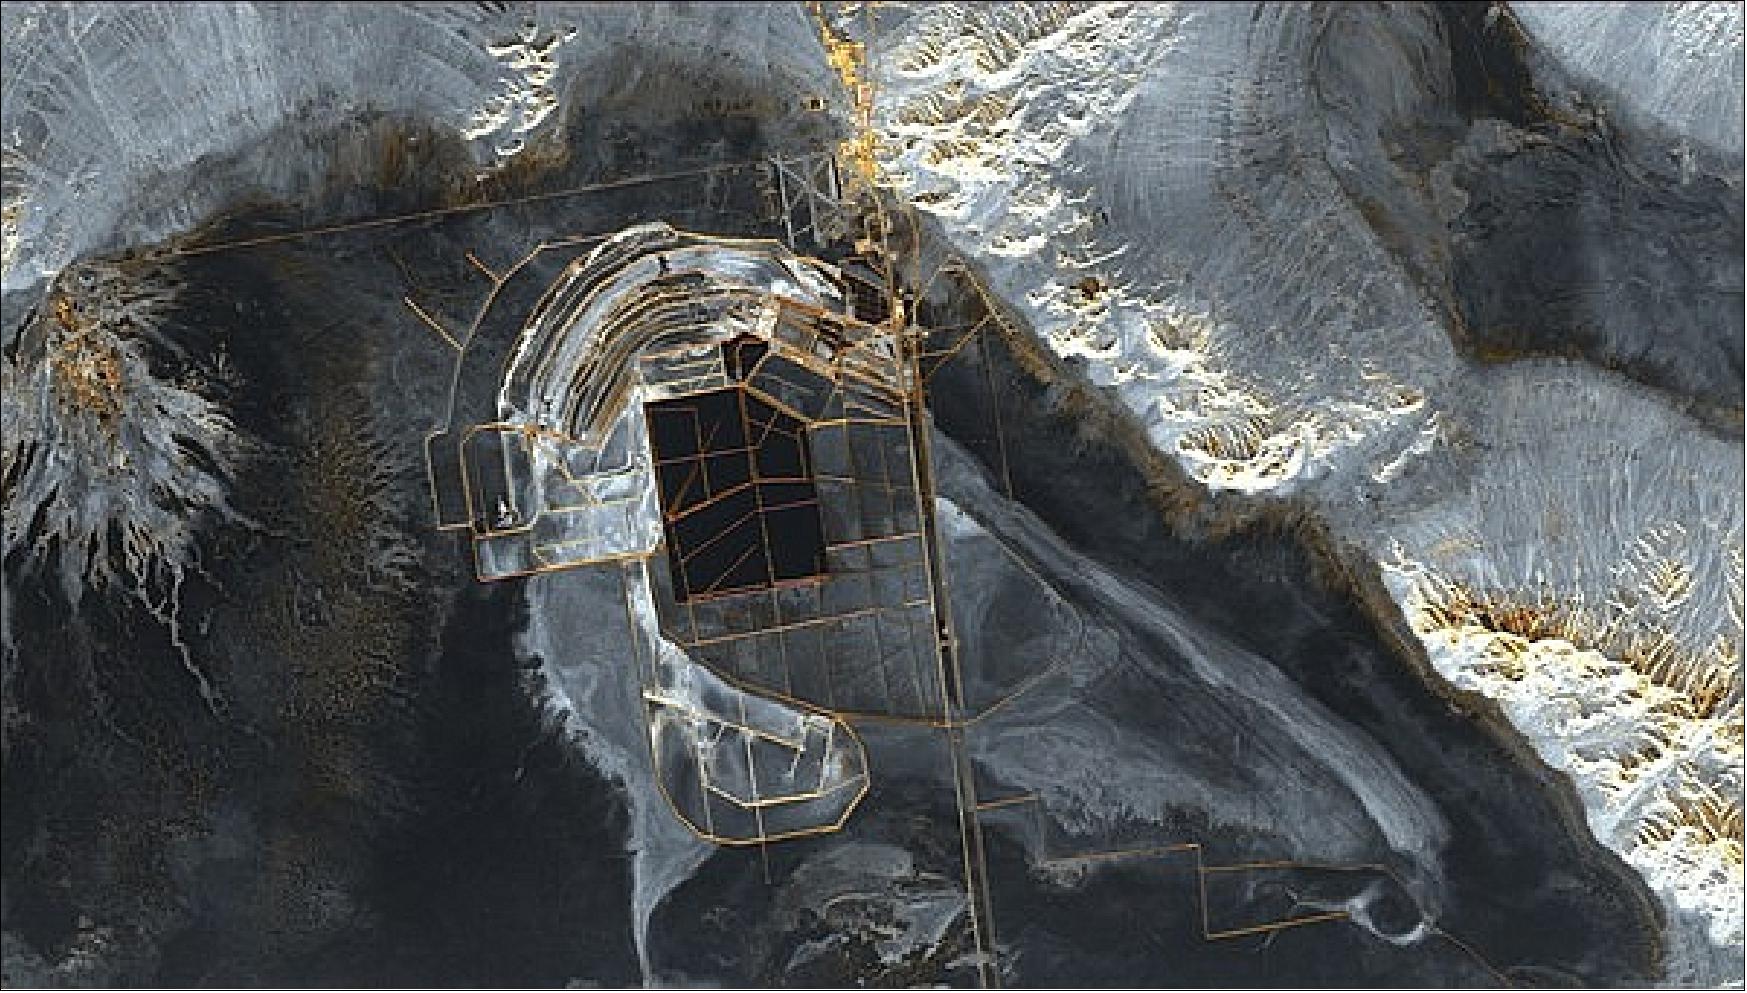 Figure 43: TerraSAR-X image of the Bonneville Salt Flats, located to the west of the Great Salt Lake in Utah, USA (image credit: DLR)